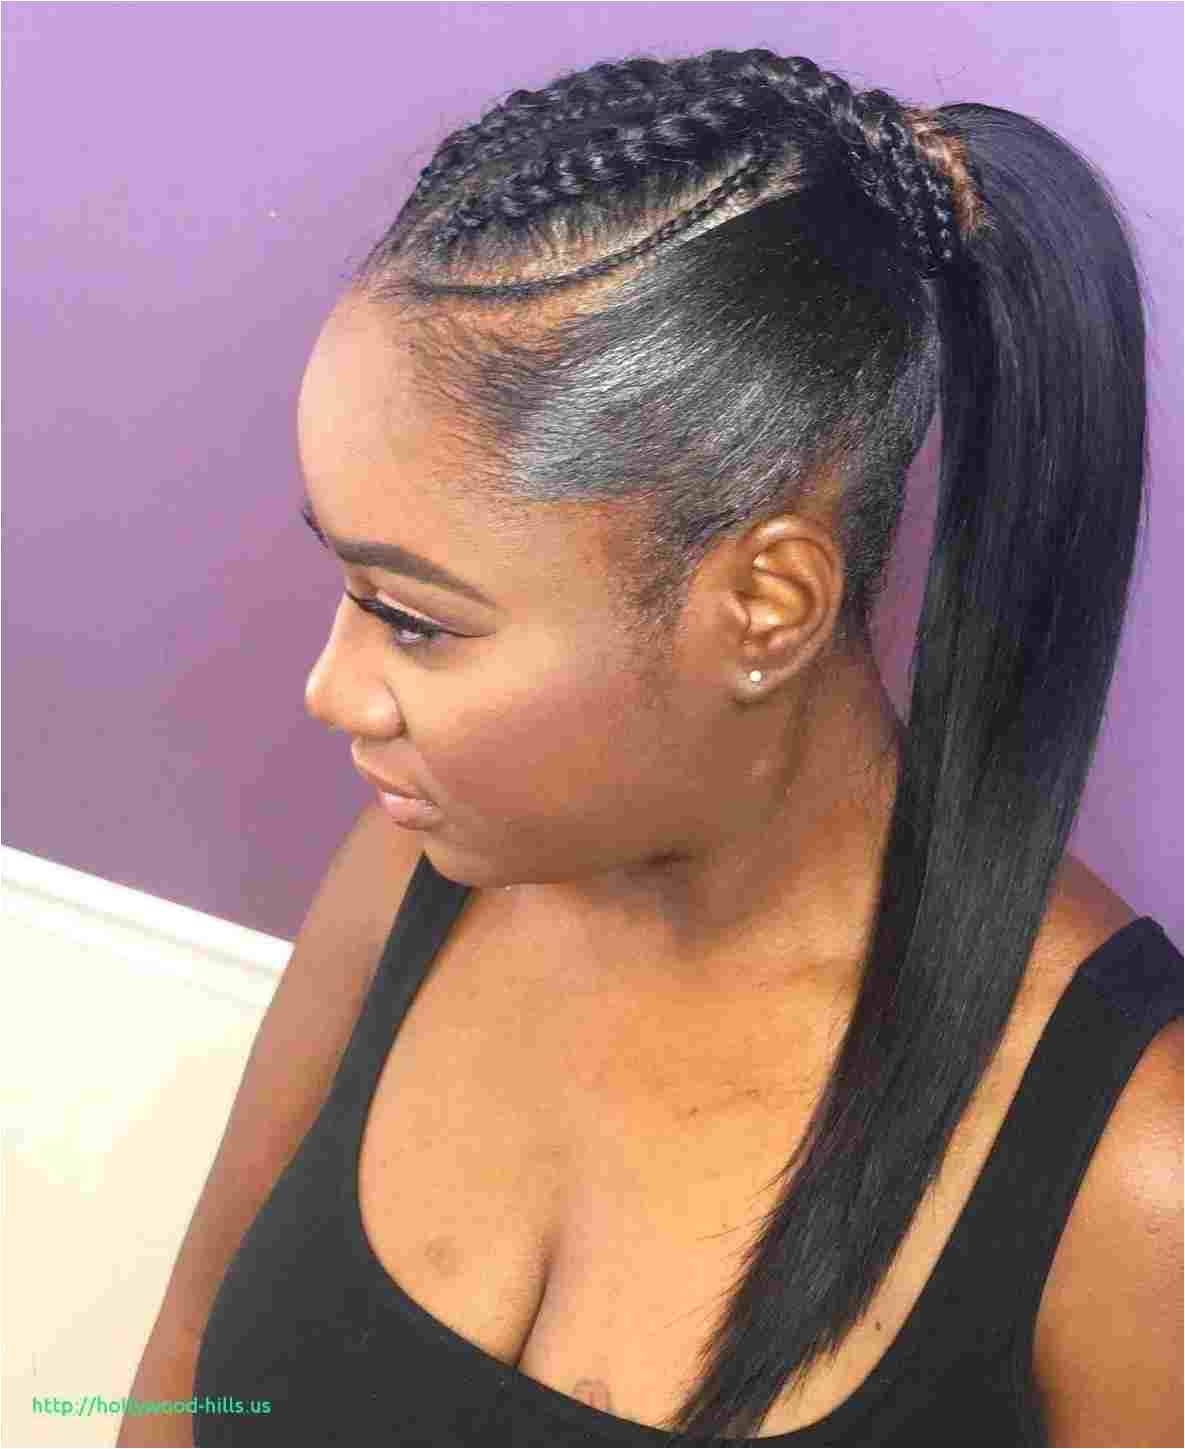 hairstyles different types of african braids with in south africa hollywood hillsrhhollywoodhillsus stunning hair braiding styles